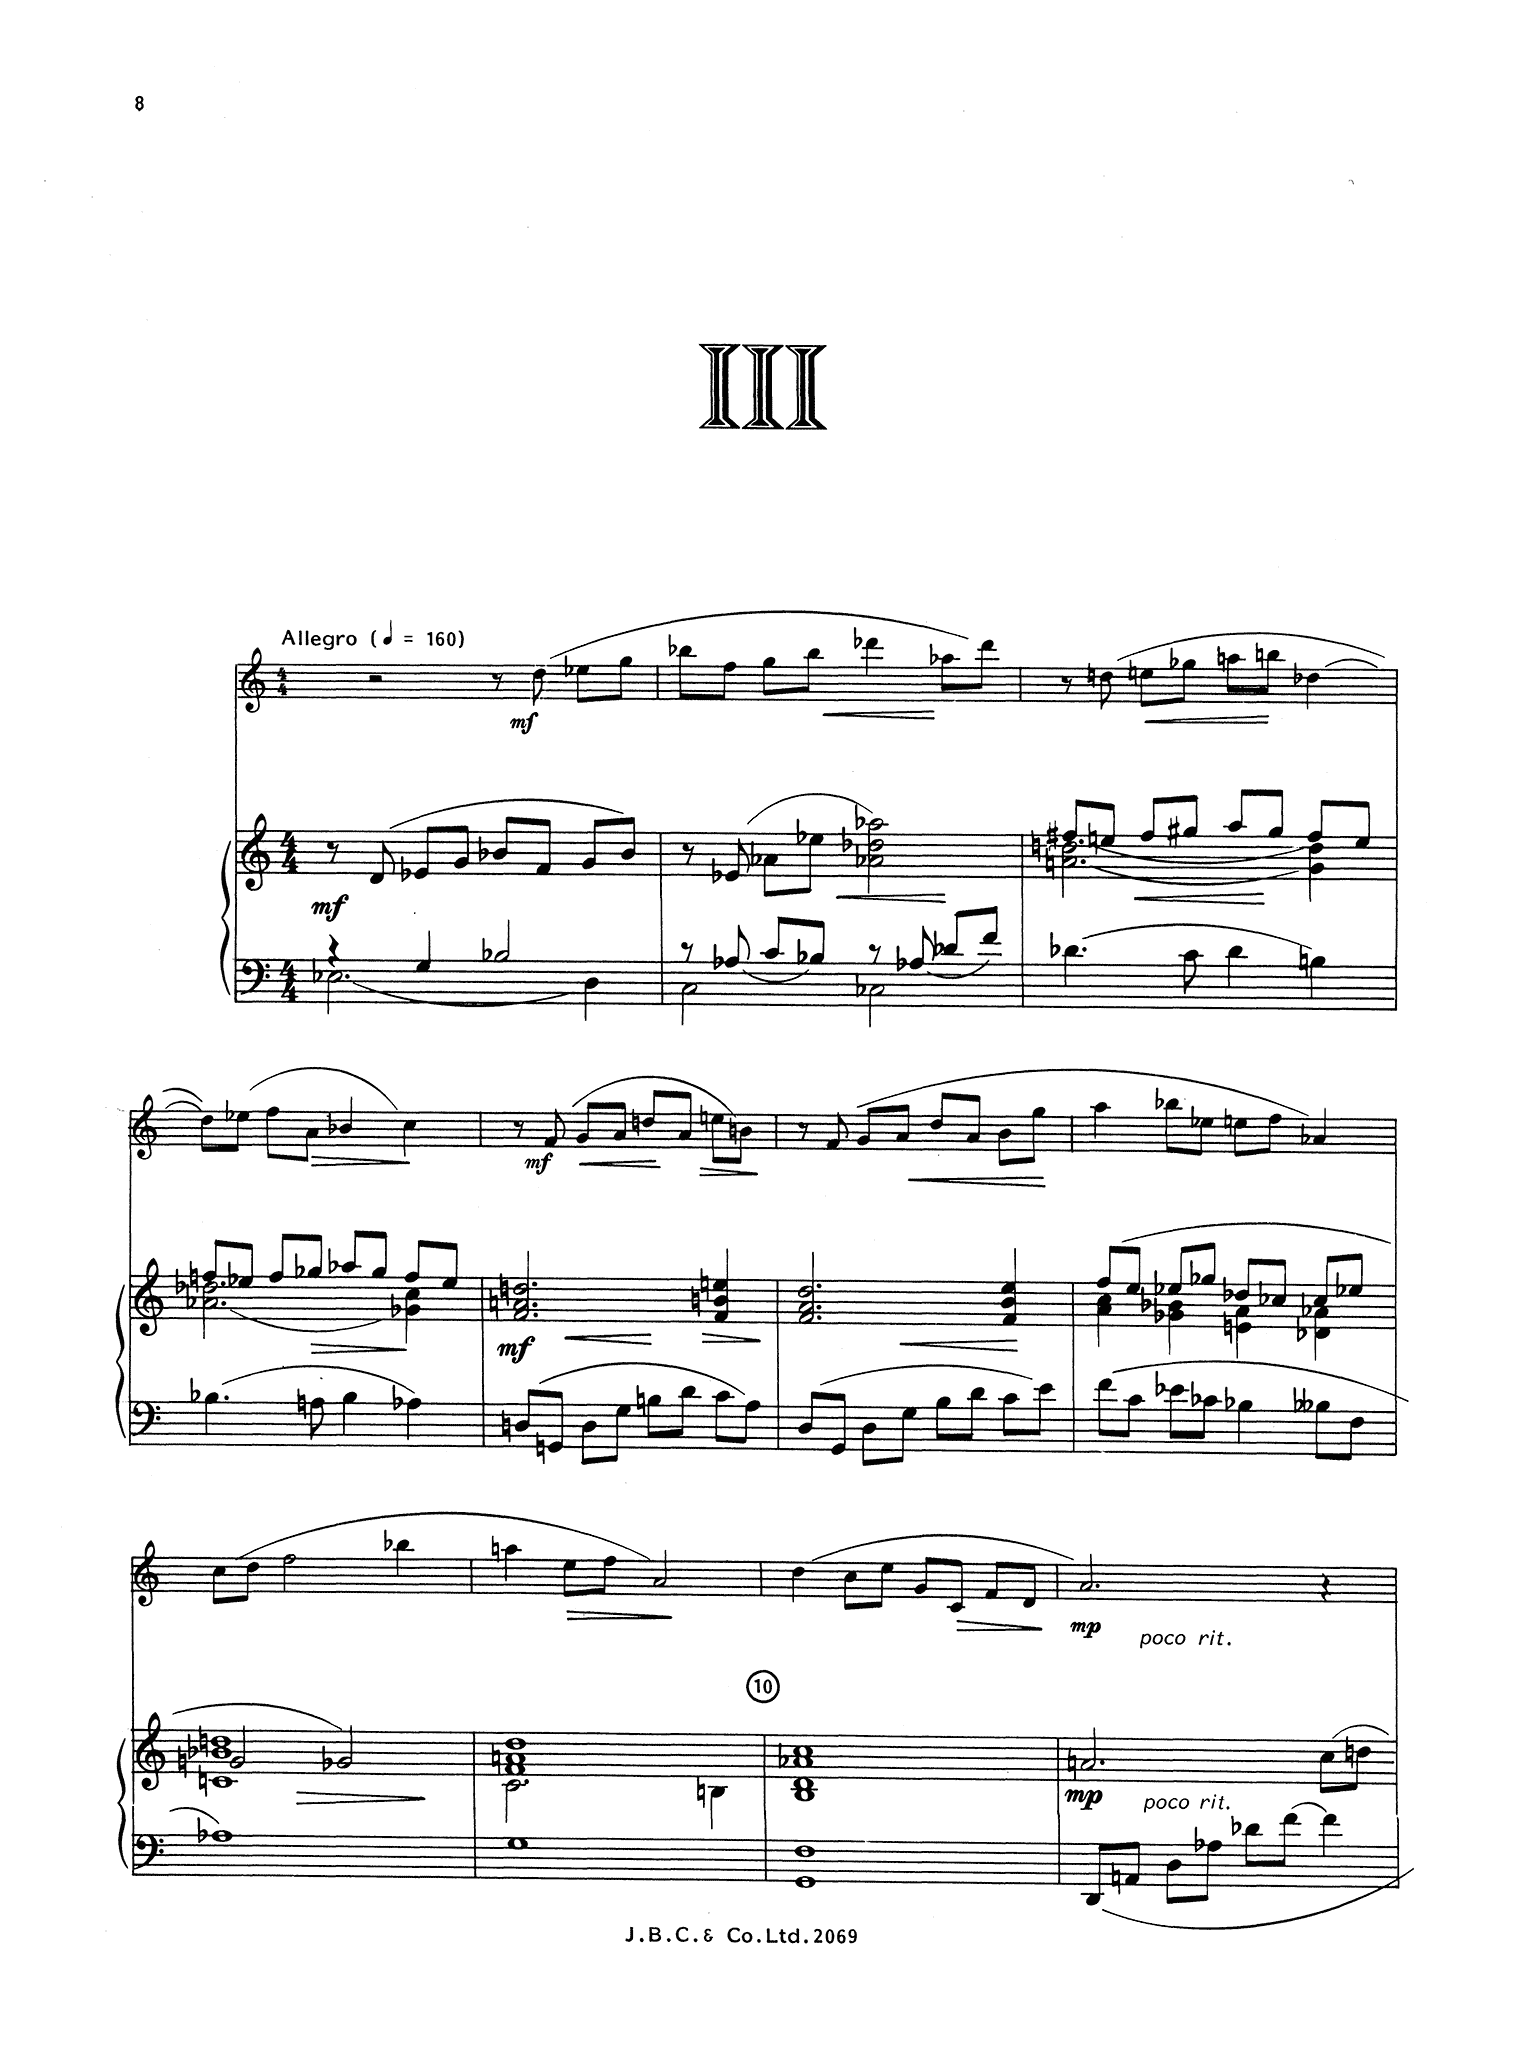 Carr Three Bagatelles clarinet and piano - Movement 3